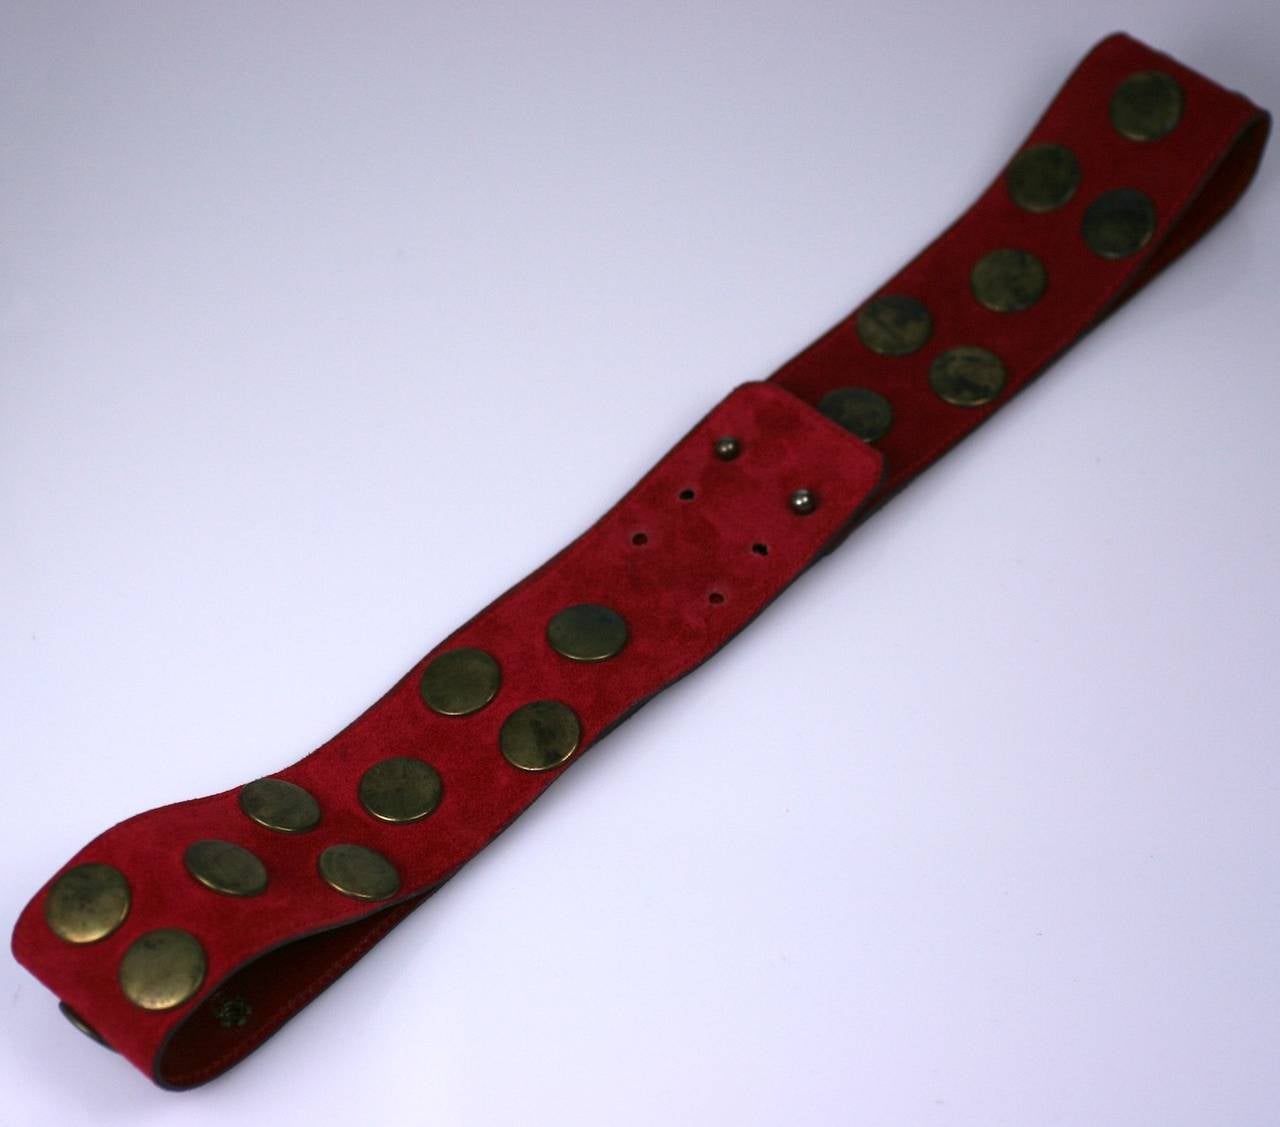 Early Sonia Rykiel brass studded red suede belt. Worn as a anchor for her oversized graphic knits. 1980's France. 
Adjustable 30-33